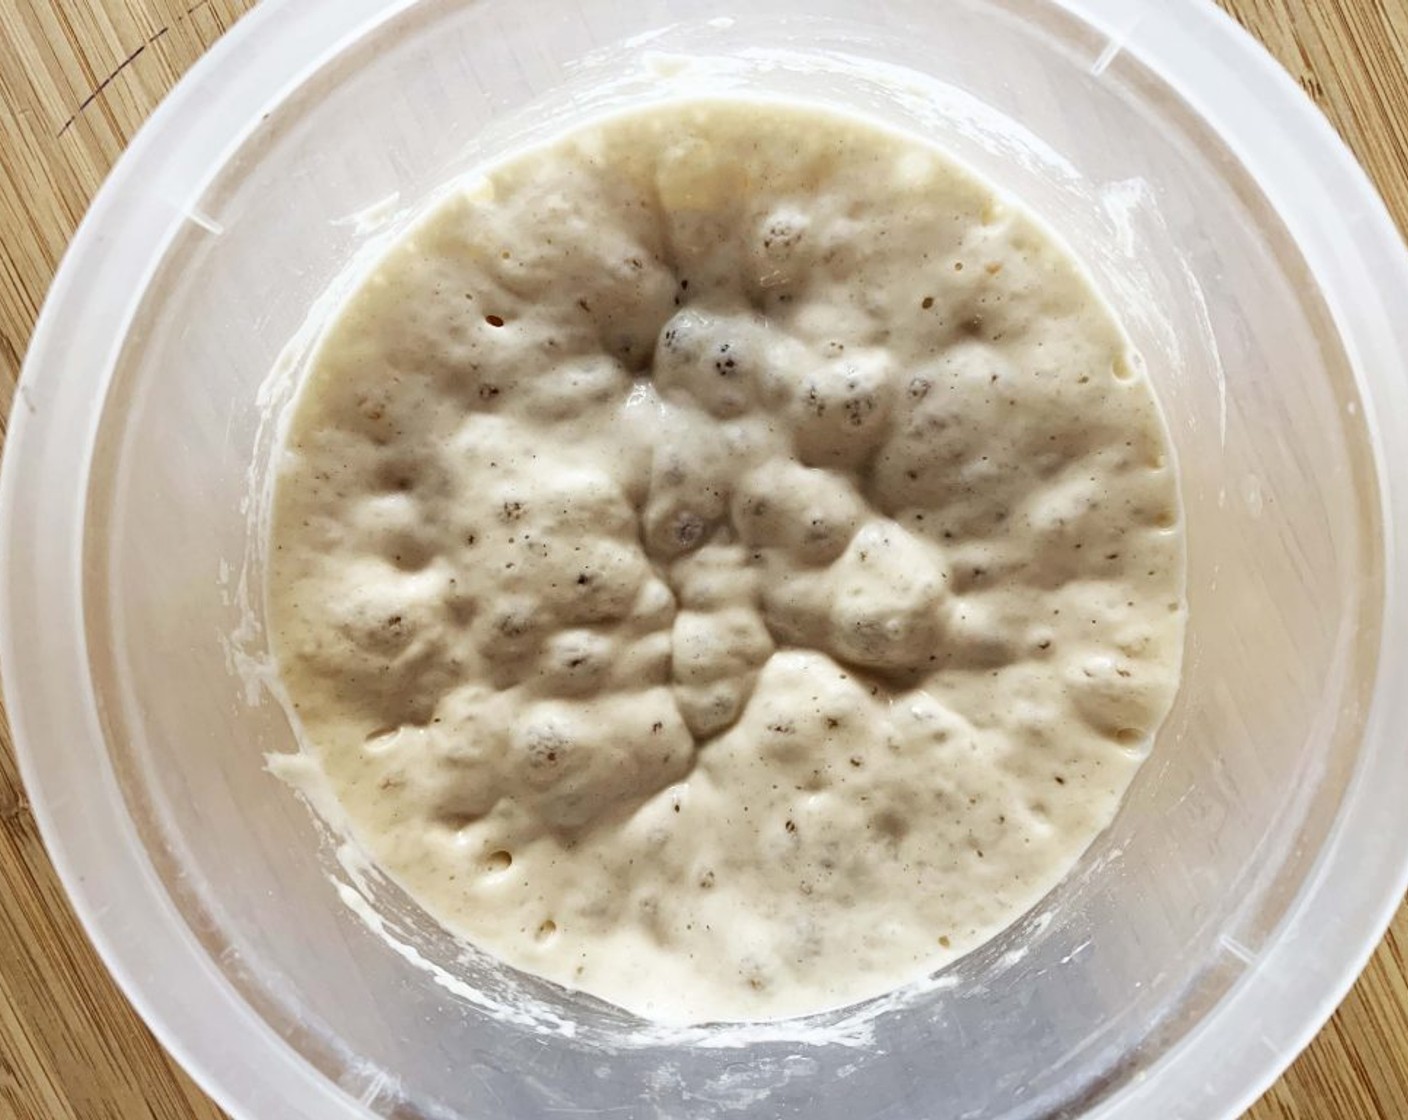 step 1 In a bowl using a fork mix together the Water (2 oz), Type 0 Flour (1/3 cup), and Fresh Yeast (1/4 tsp) to make the poolish. Cover with plastic wrap and let it rest until it gets all bubbling. Time will depend on your room temperature, but around 4-5 hours should be enough.